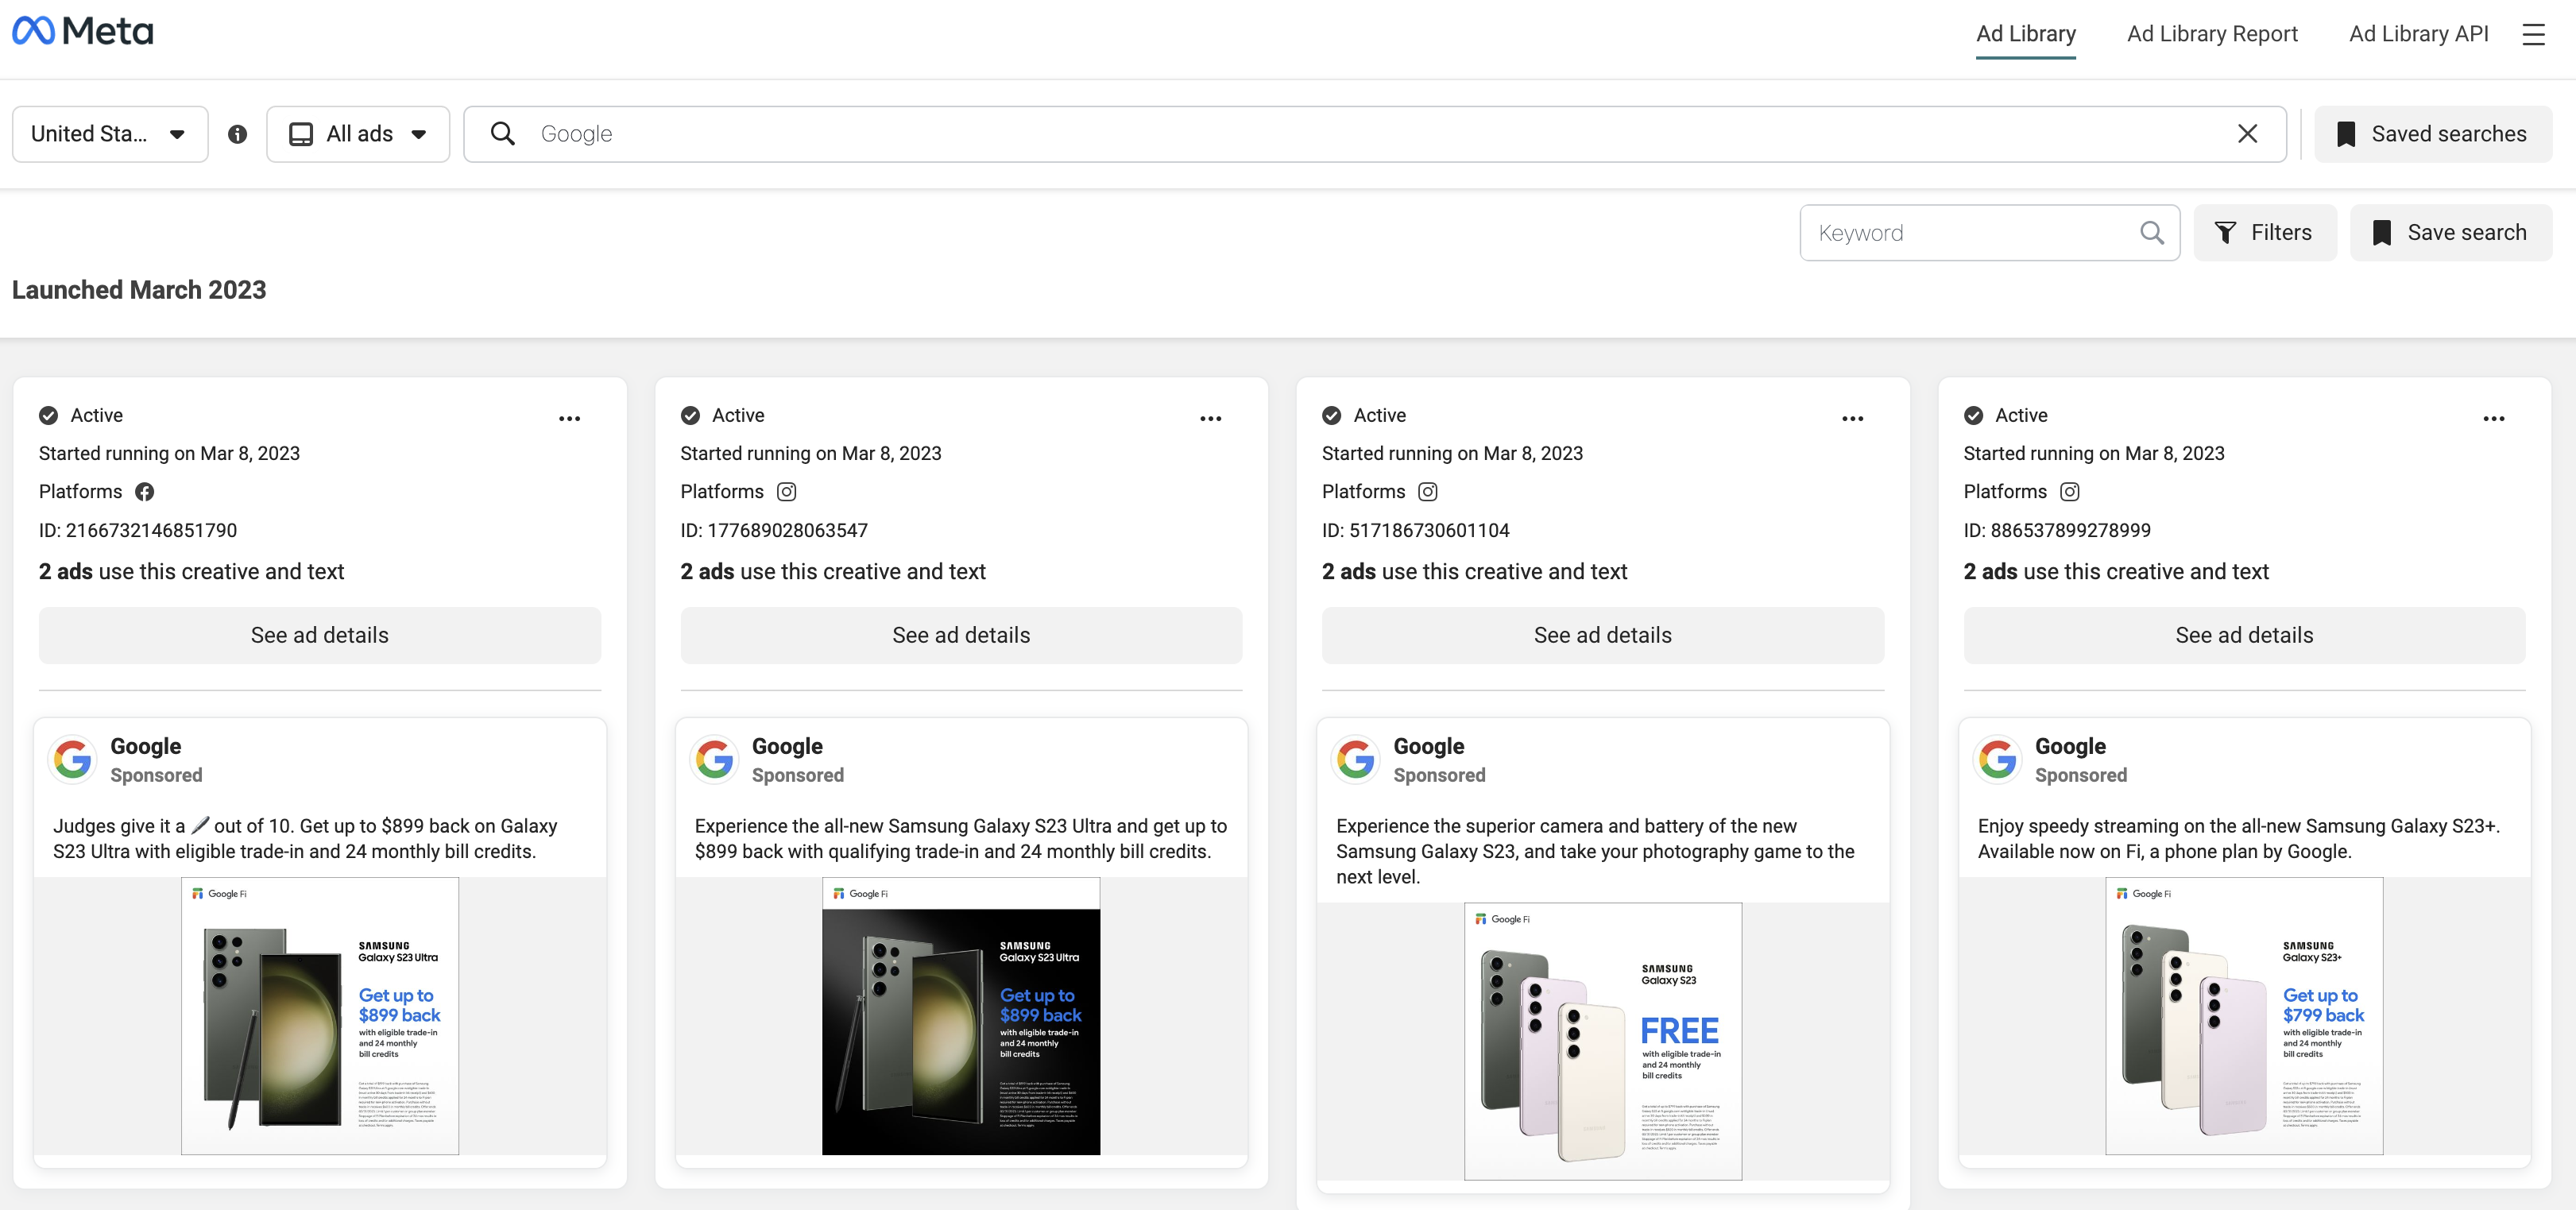 Google Announces The Ads Transparency Center And 2022 Ads Safety Report